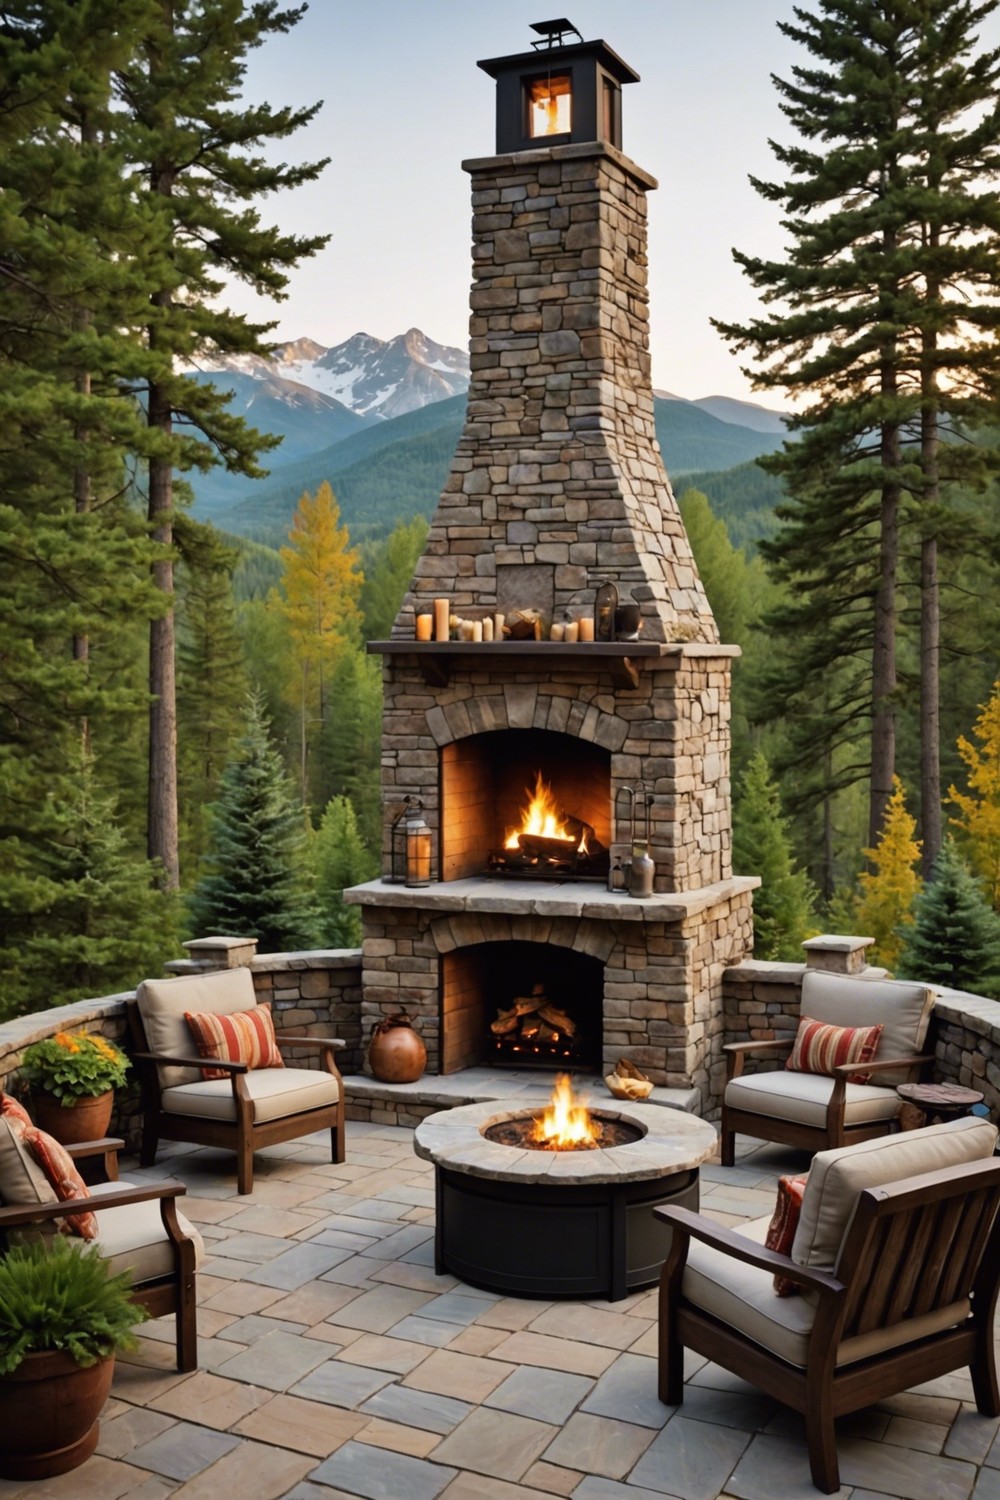 Mountain Lodge-Inspired Fireplace: